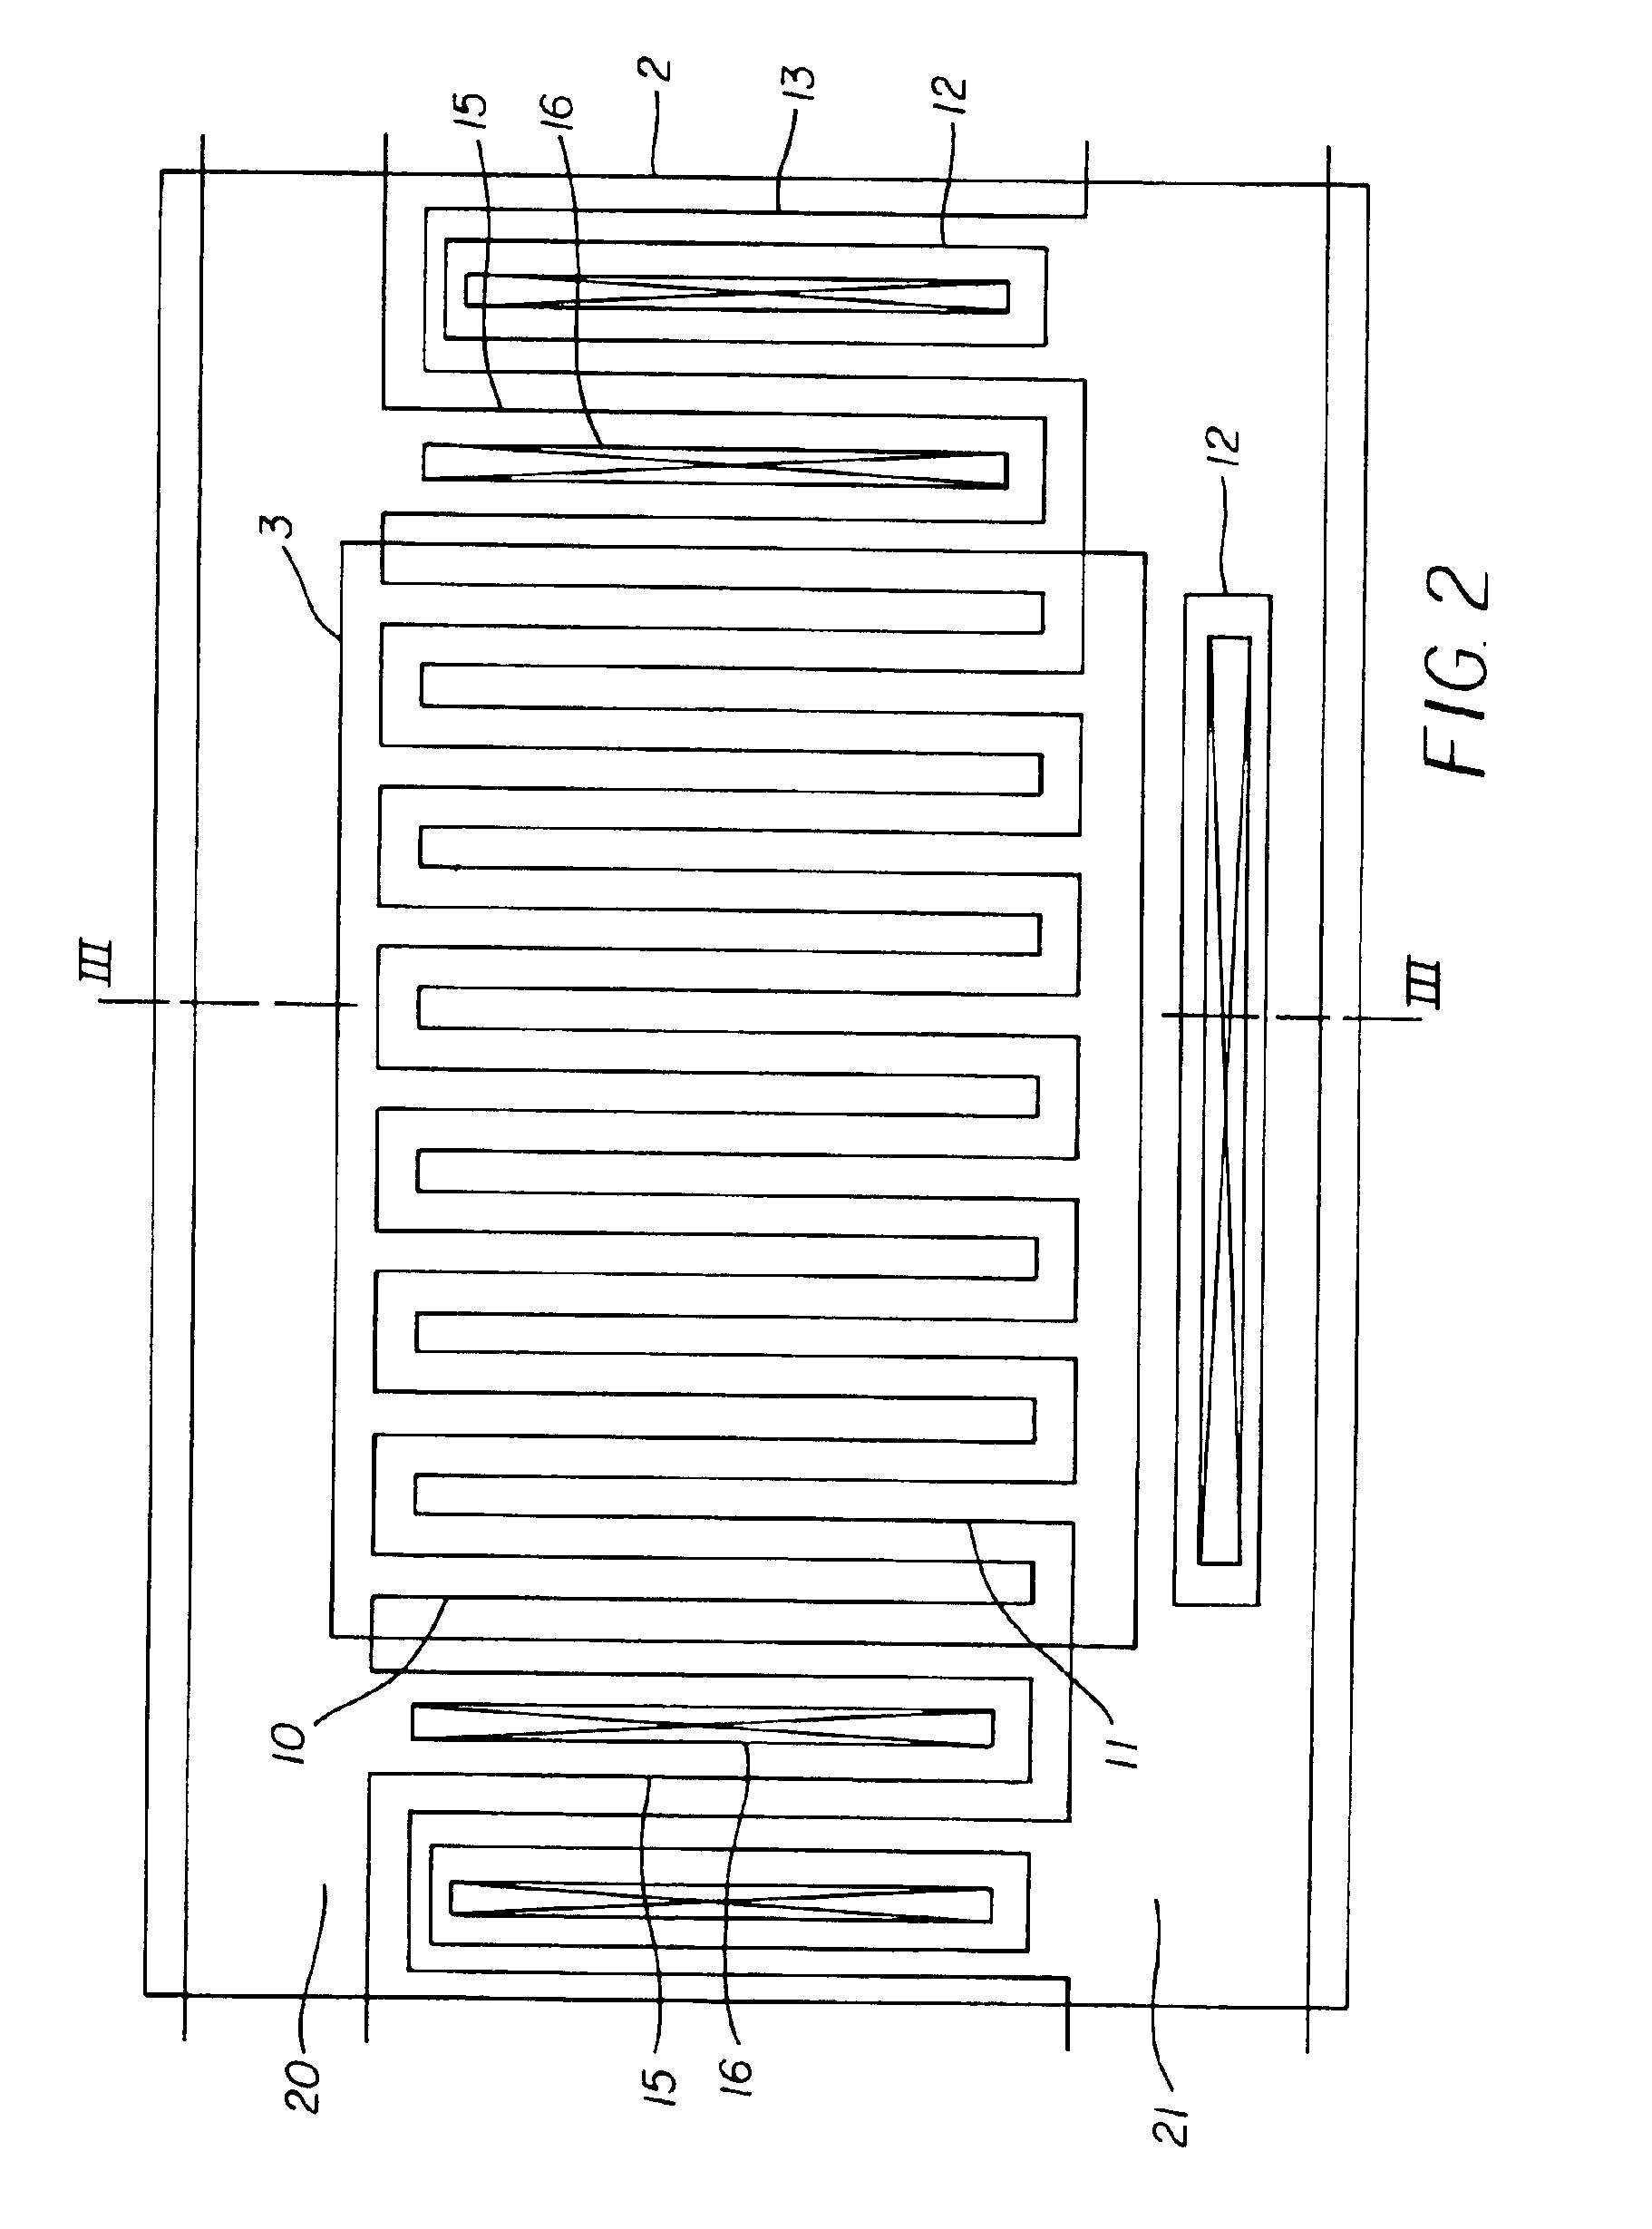 High power semiconductor device having a Schottky barrier diode